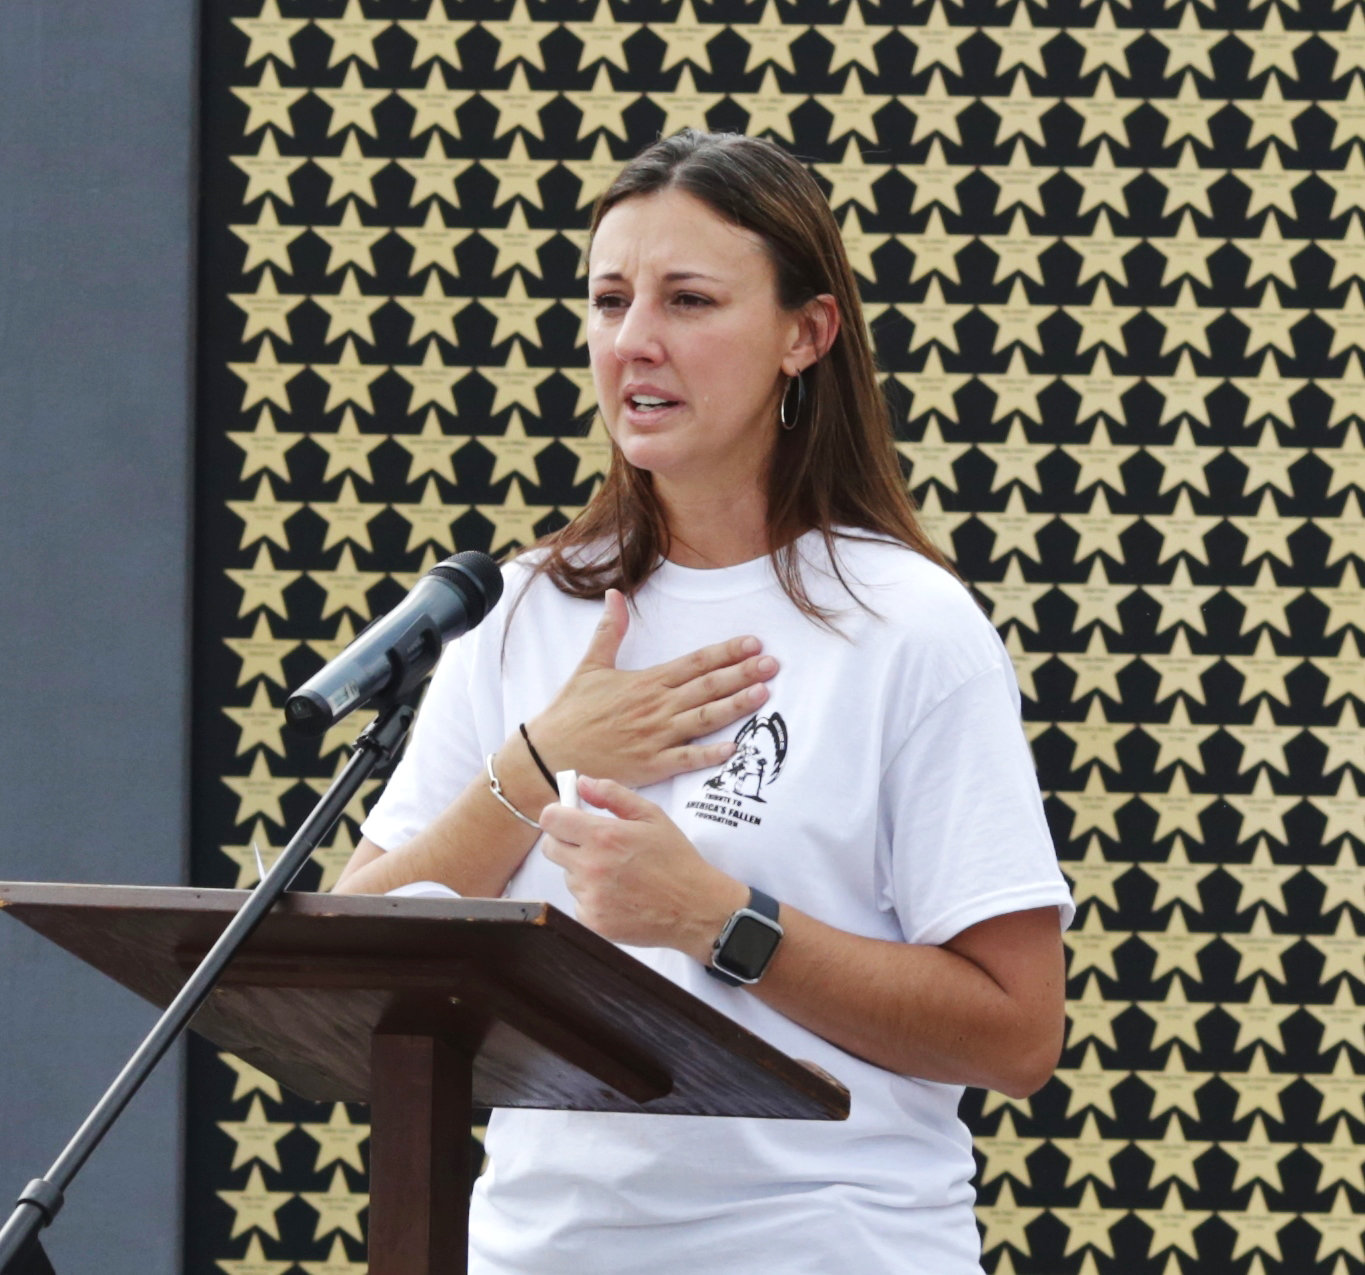 Misty Goldman of Winnsboro spoke at the GoldStars Tribute Wall ceremony Saturday morning in Mineola about her brother, Shane, who died in battle in  Iraq in 2004. Read her remarks on Page Two.